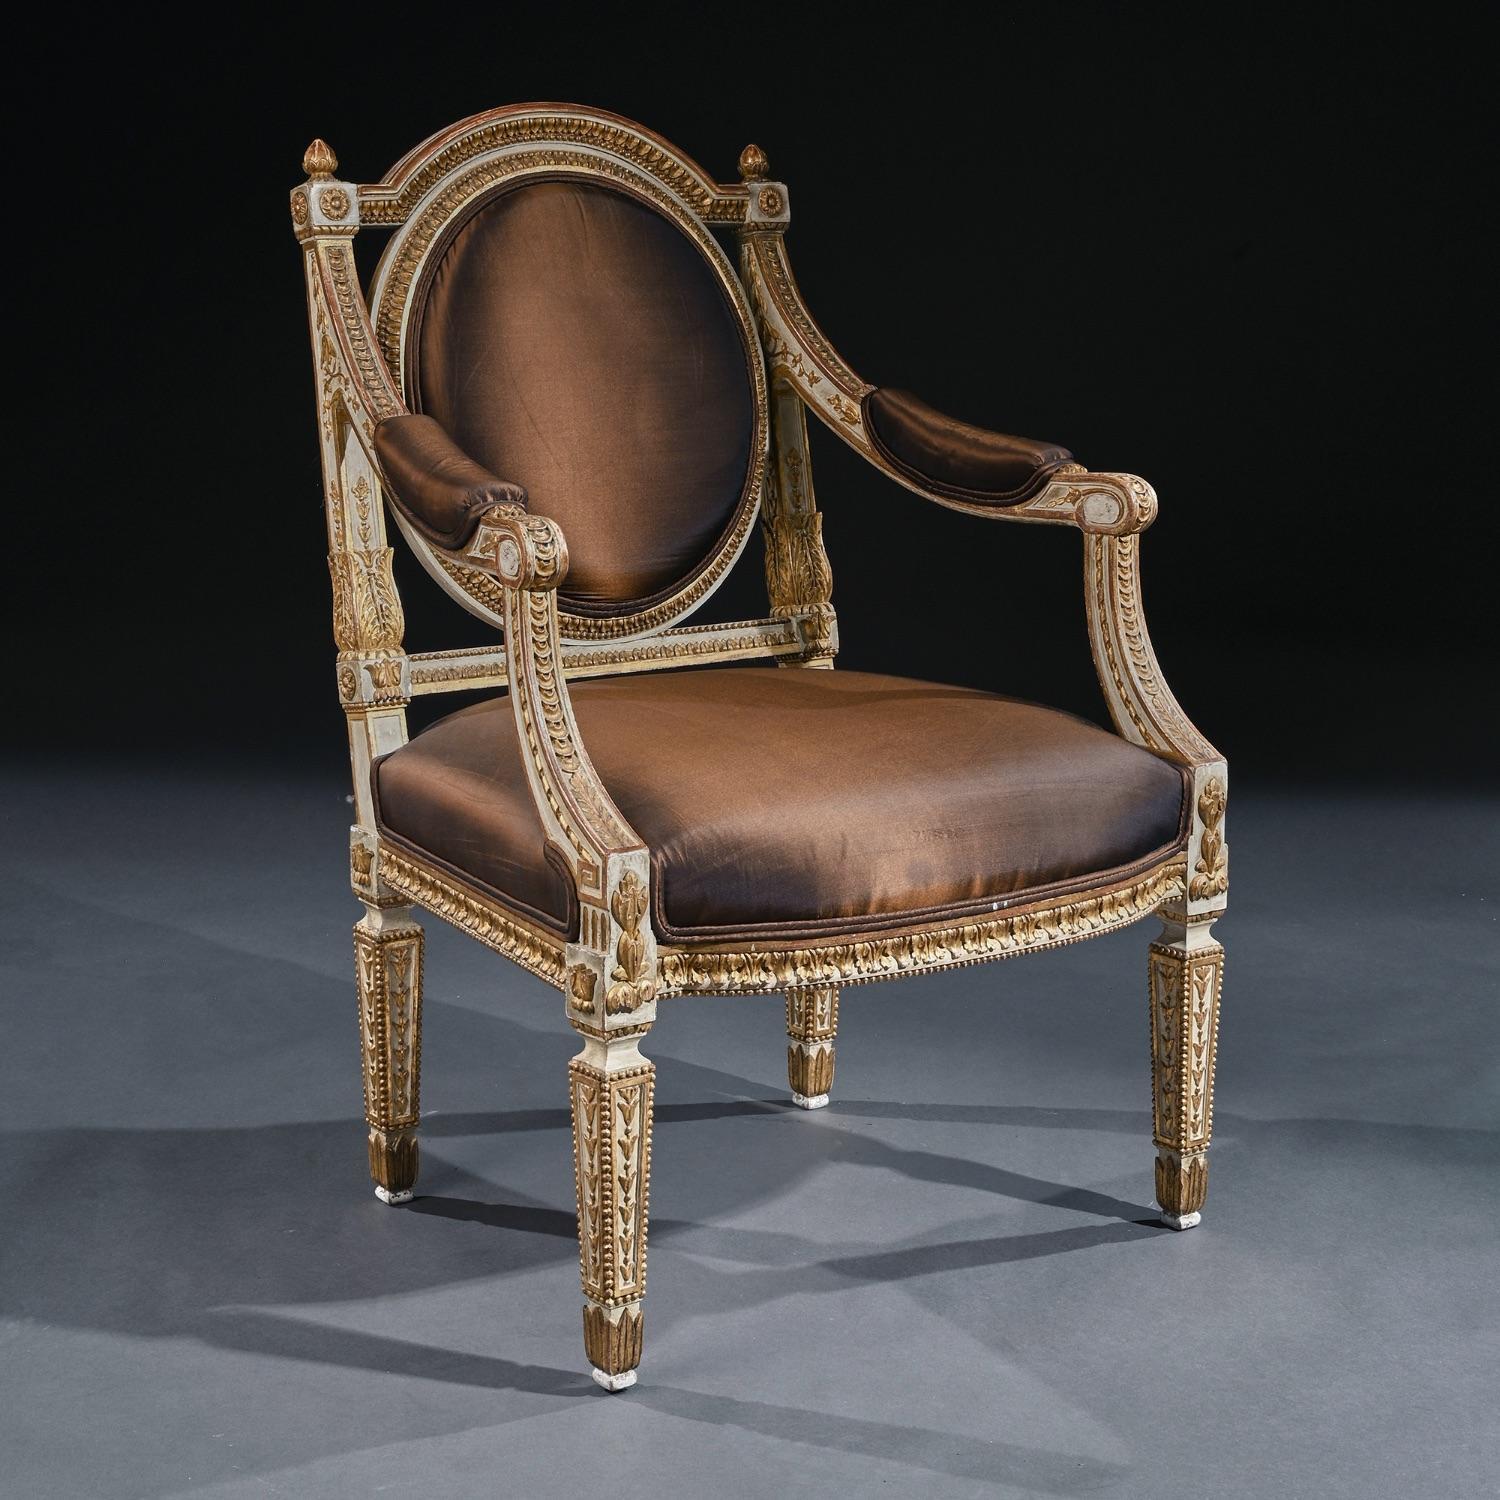 Giltwood 19th Century Italian Parcel Gilt Armchairs of Neoclassical Design